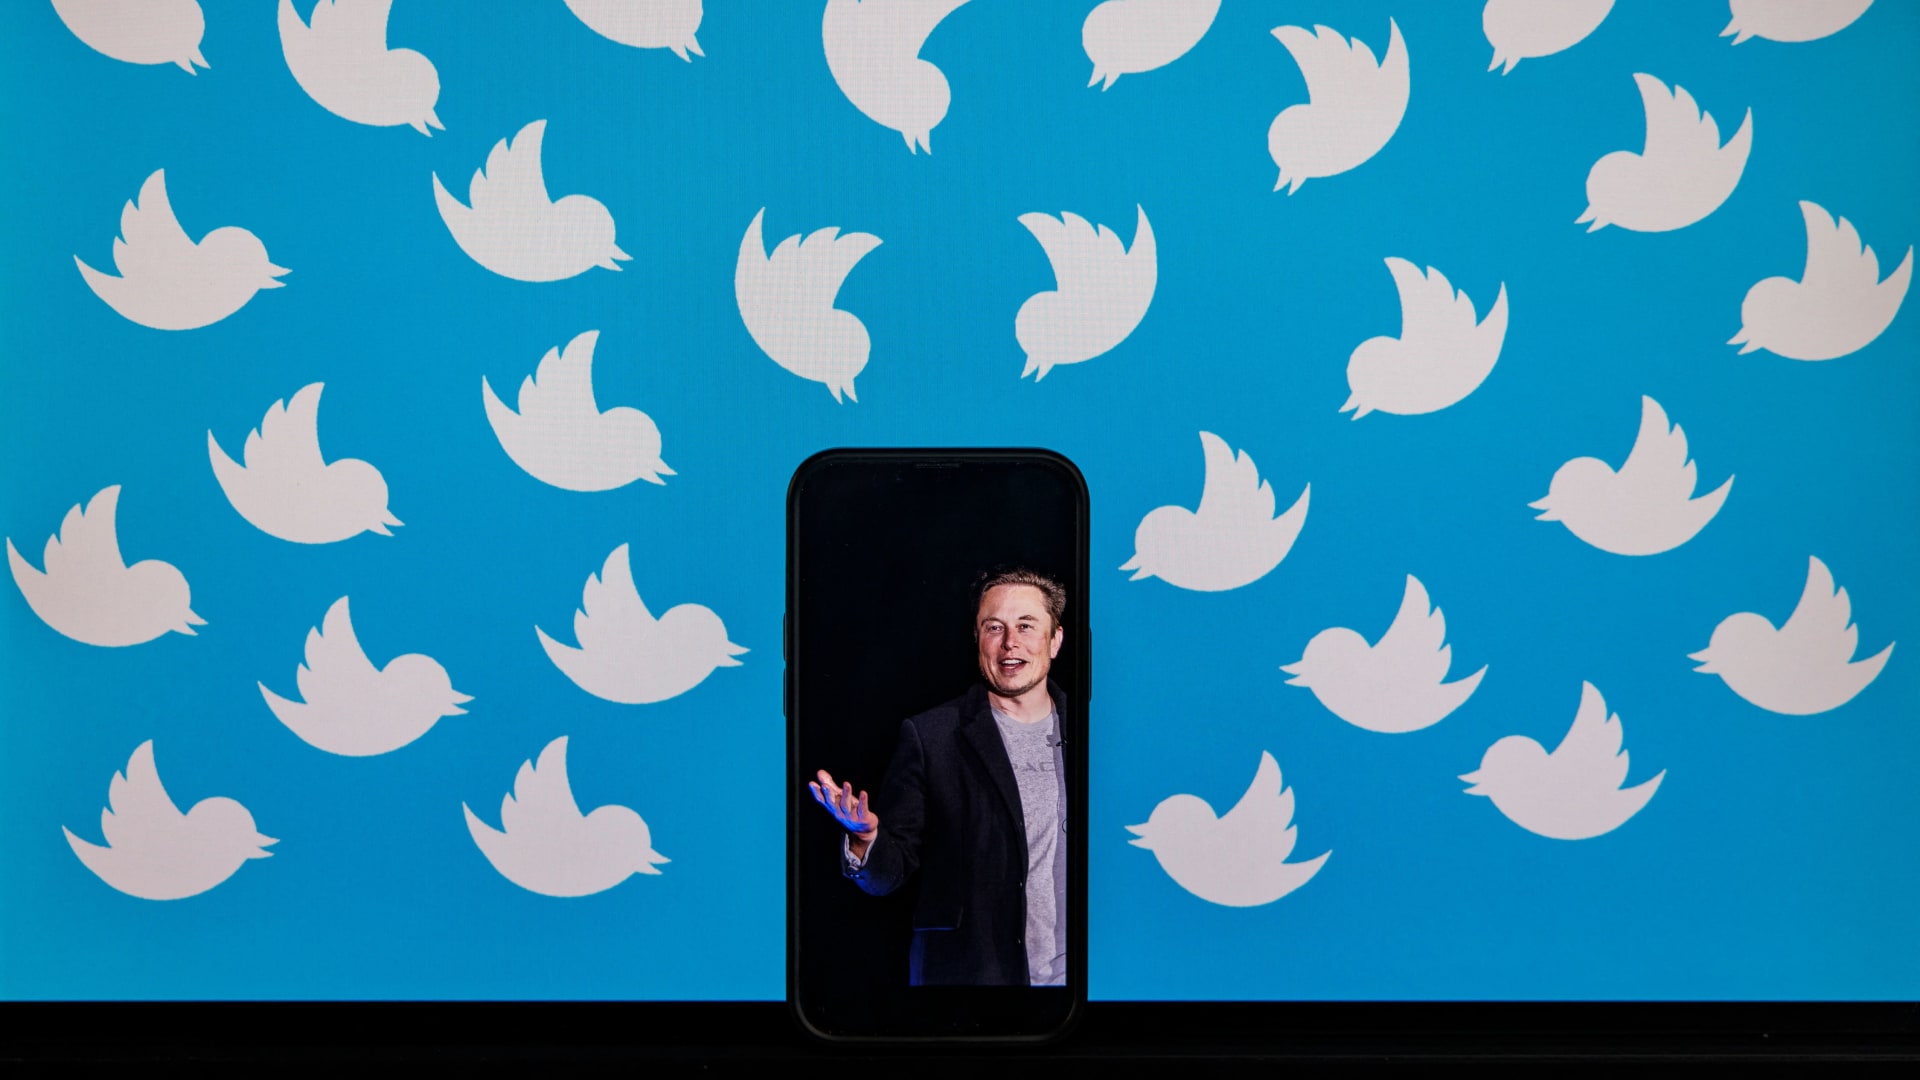 Elon Musk's plans for Twitter may take inspiration from Chinese super apps